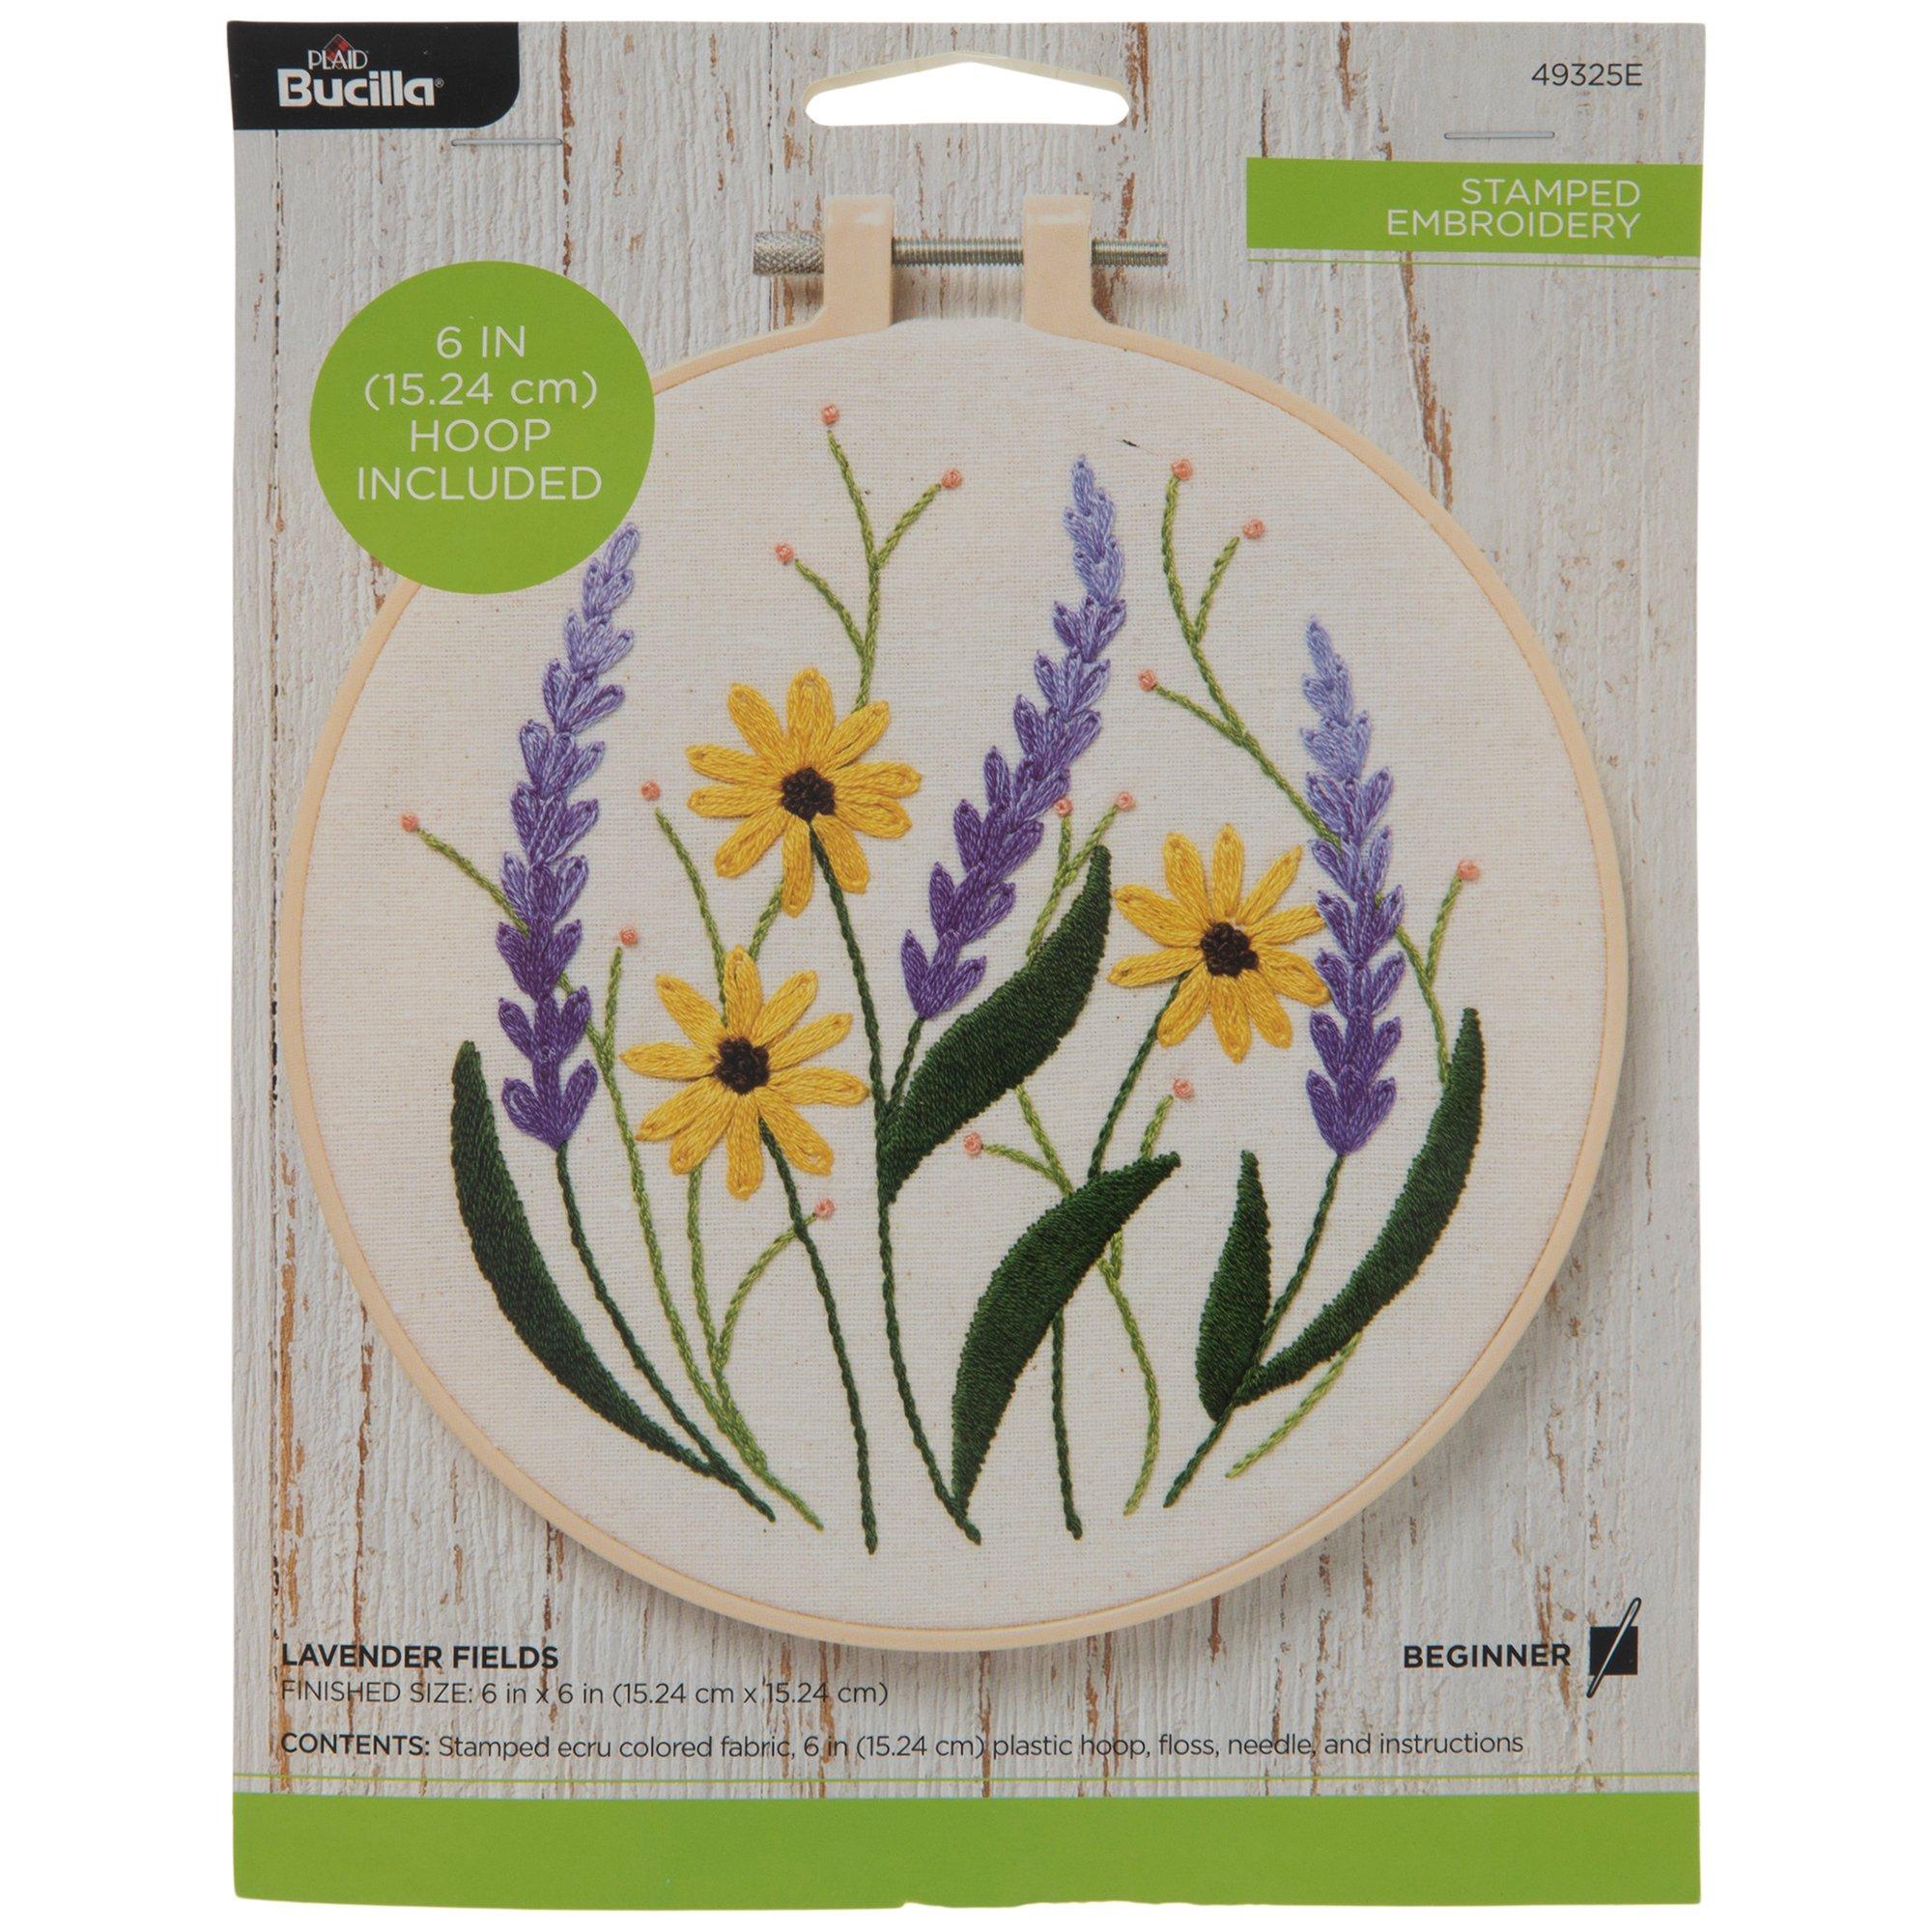 BUCILLA Stamped Embroidery Kit with Hoop LAVENDER FIELDS Floral 6 INCH  Round